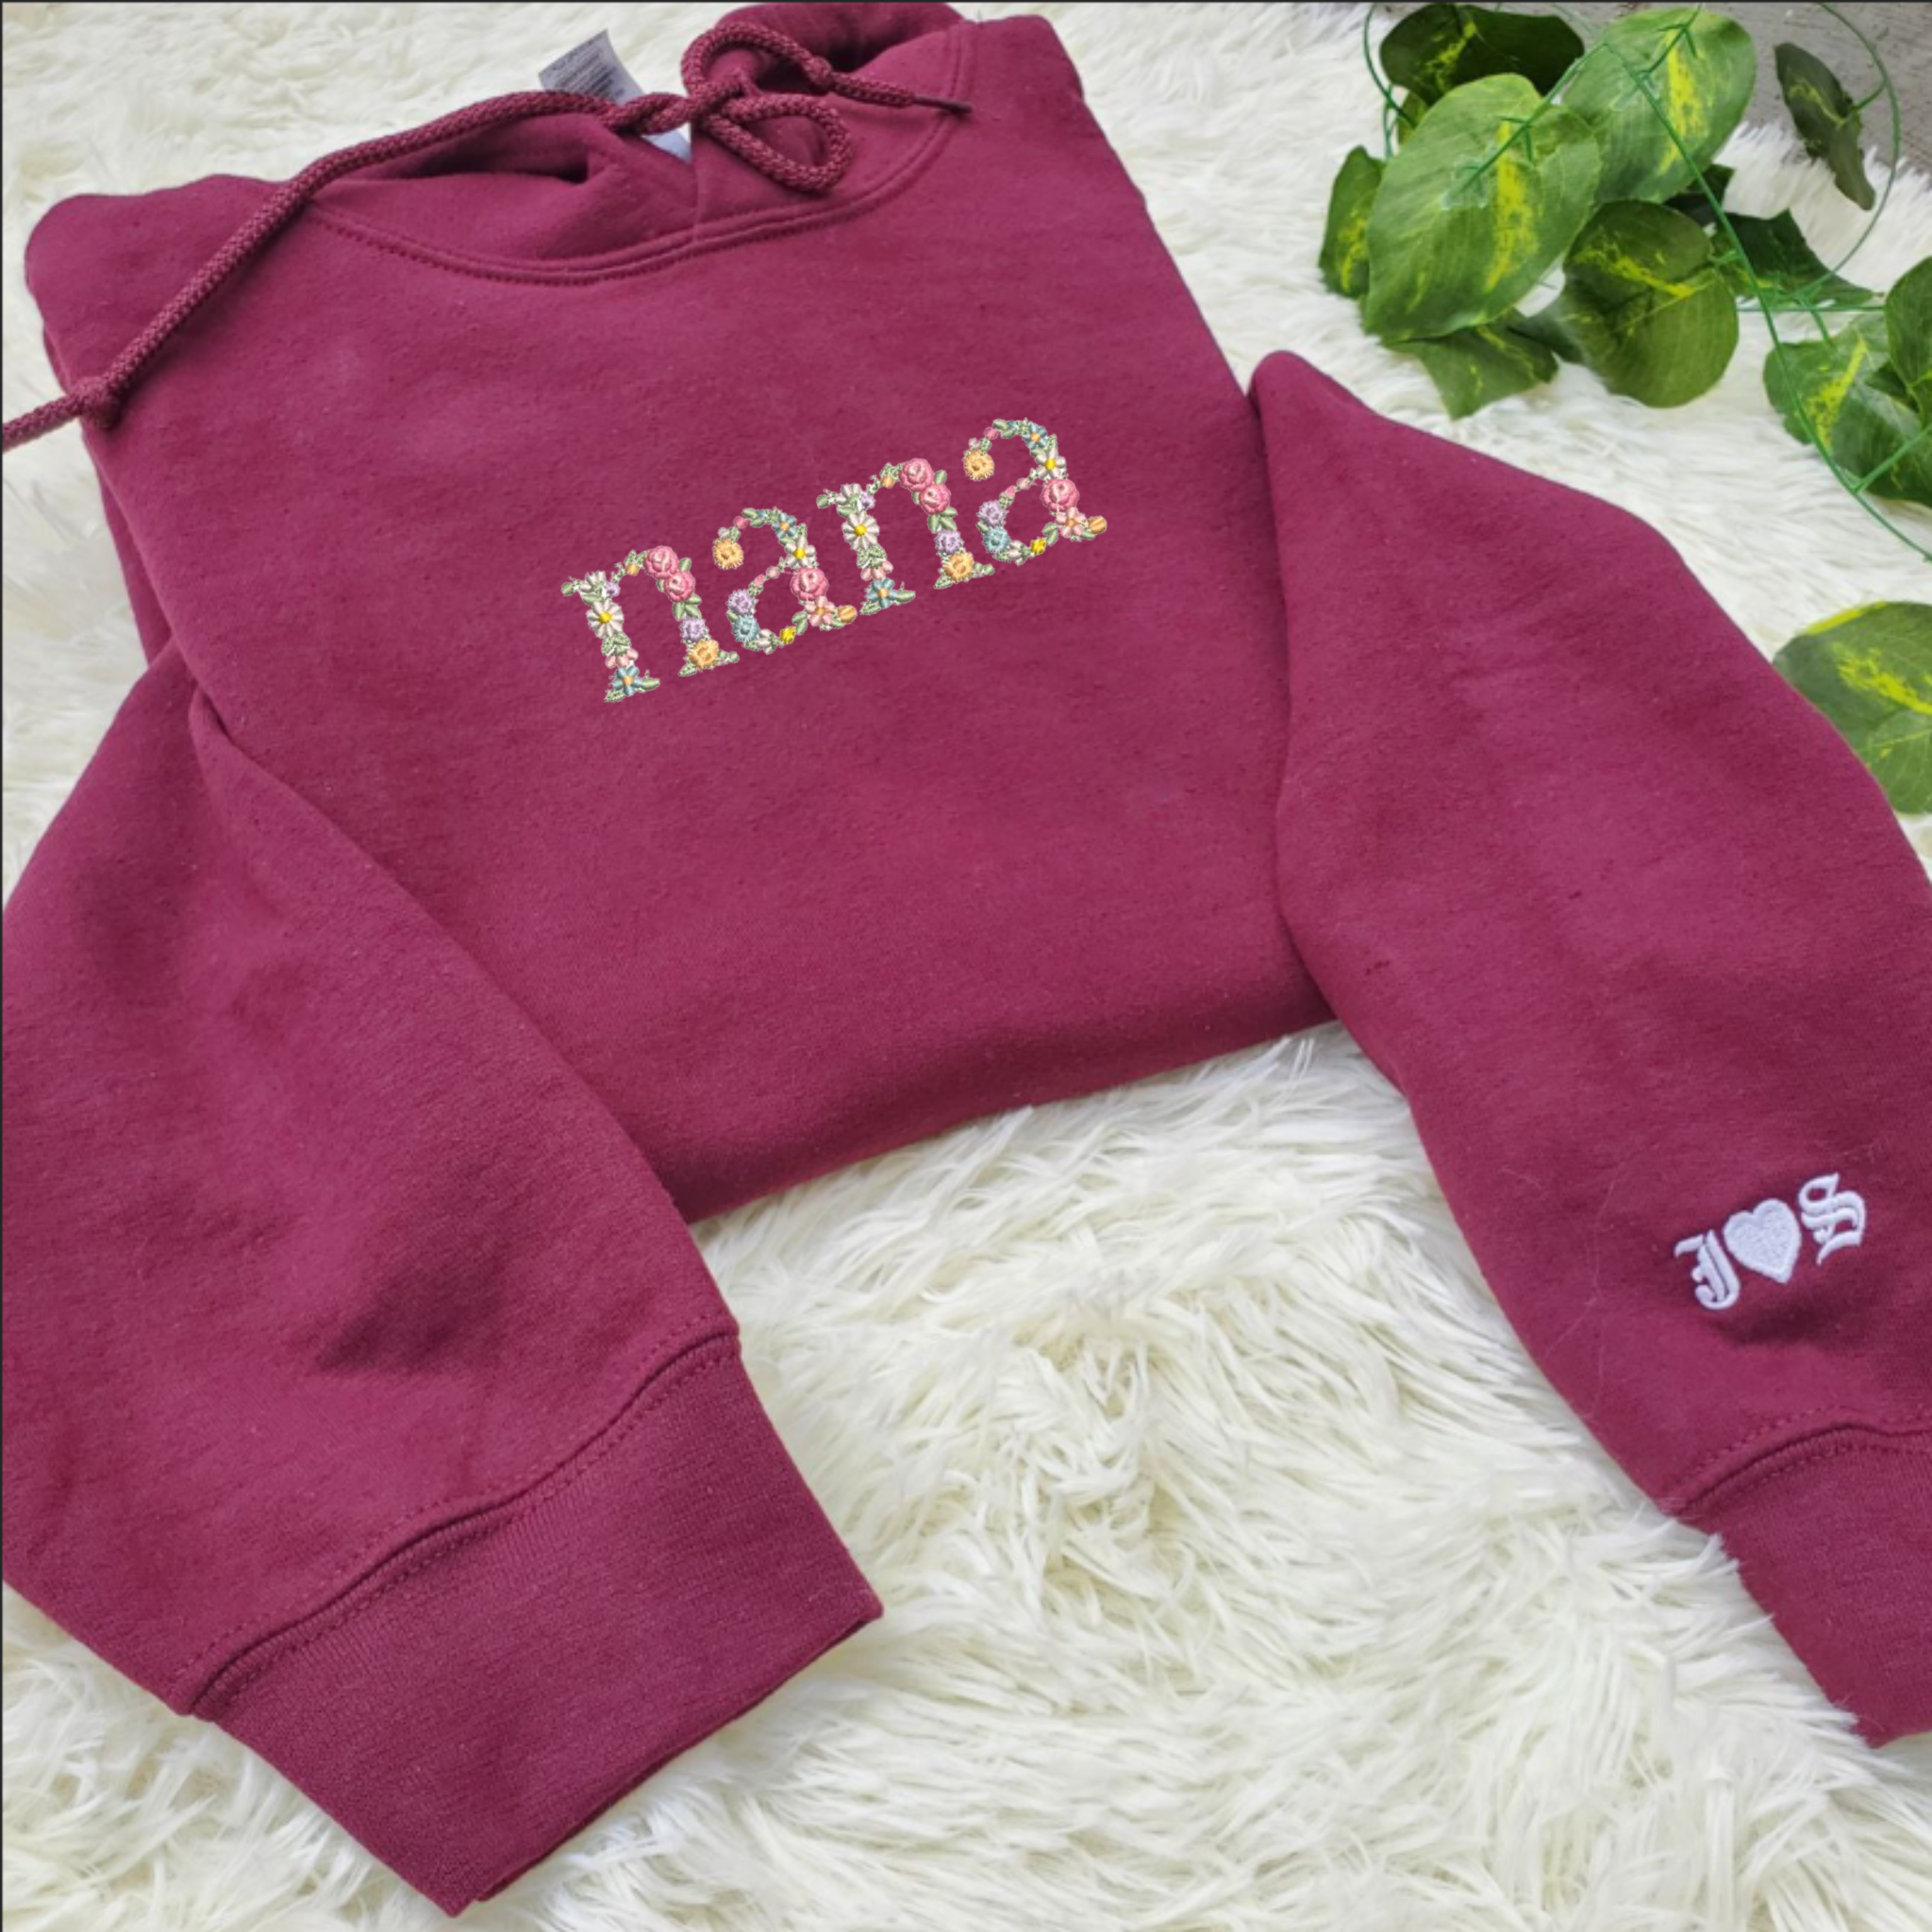 Embroidered Floral Initial Sweatshirt 